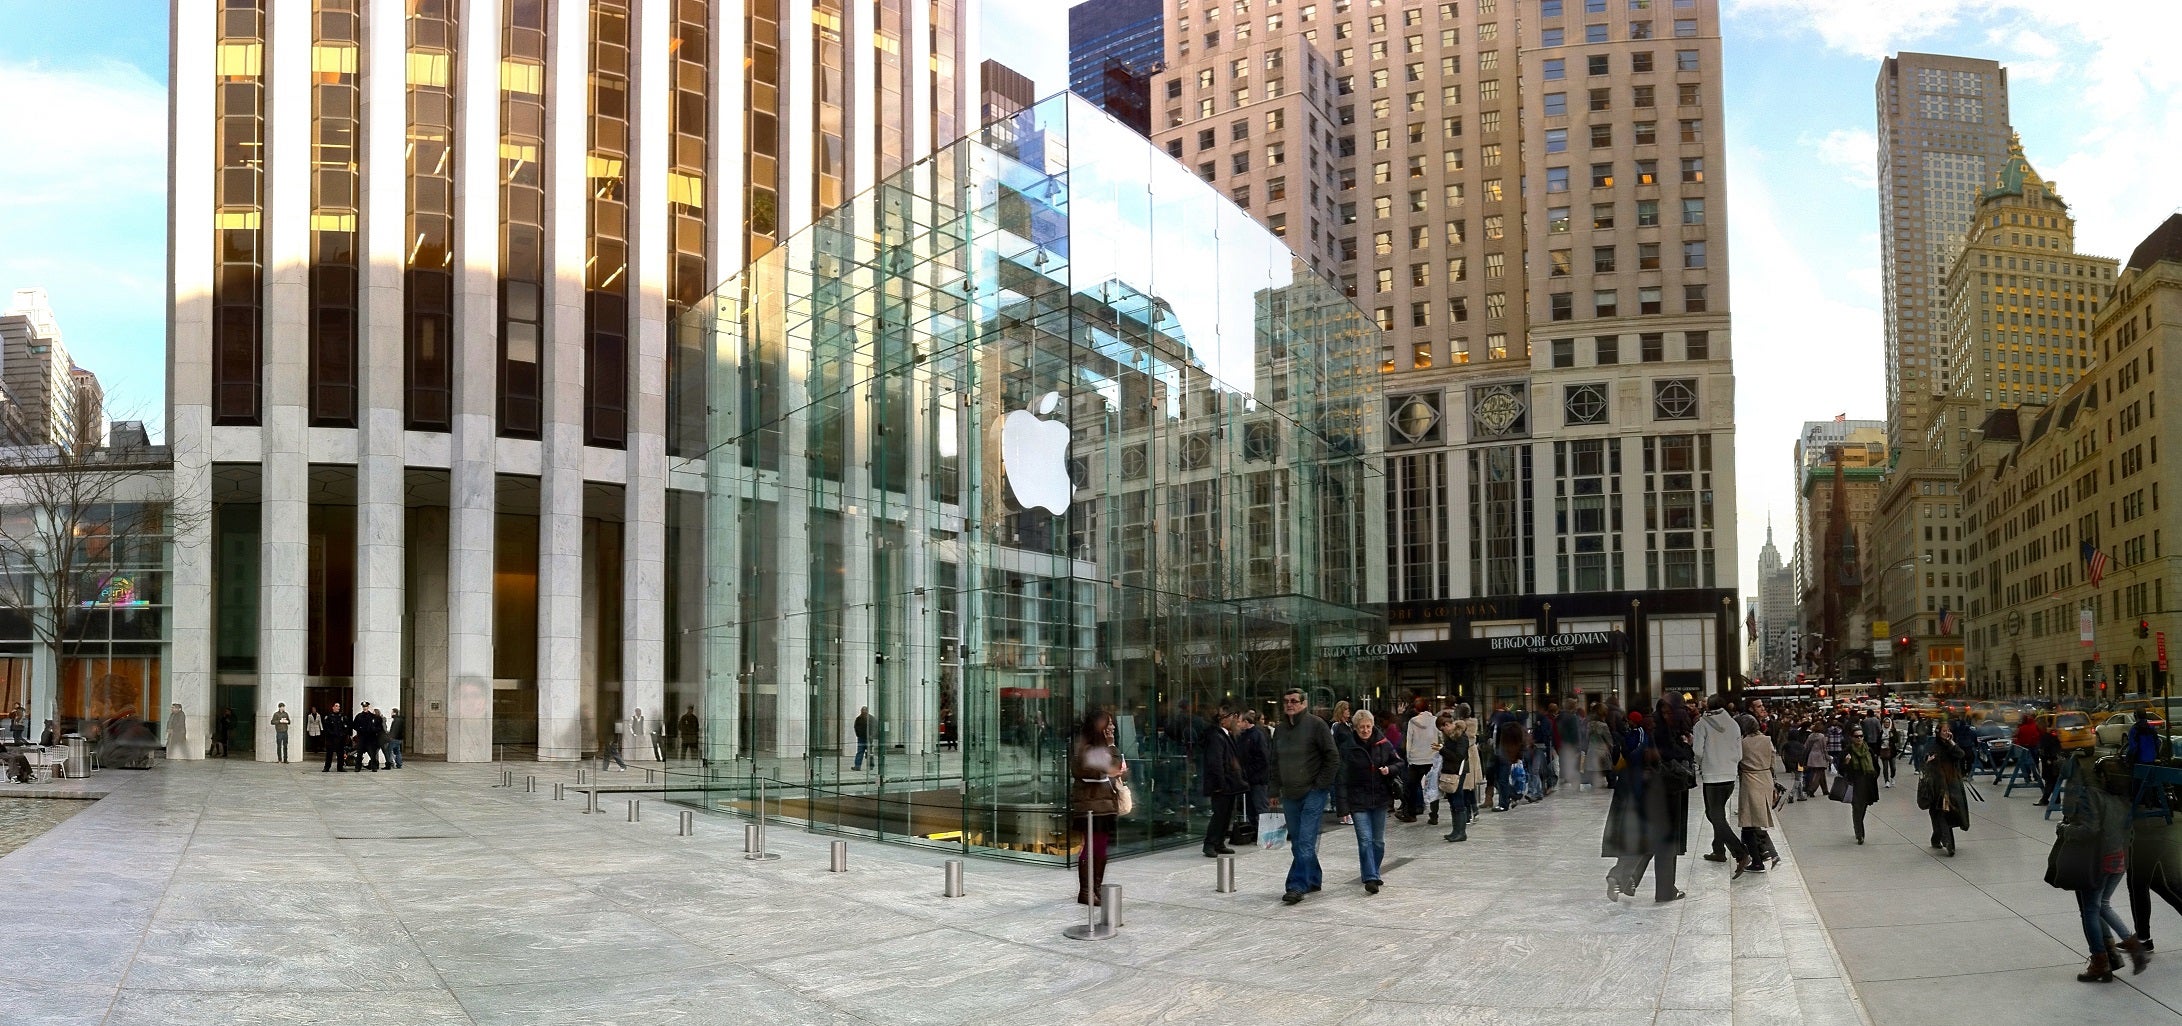 Five blocks from Microsoft's flagship store is Apple's iconic glass cube store - Microsoft confirms Fifth Avenue in New York City will be site of “flagship store”